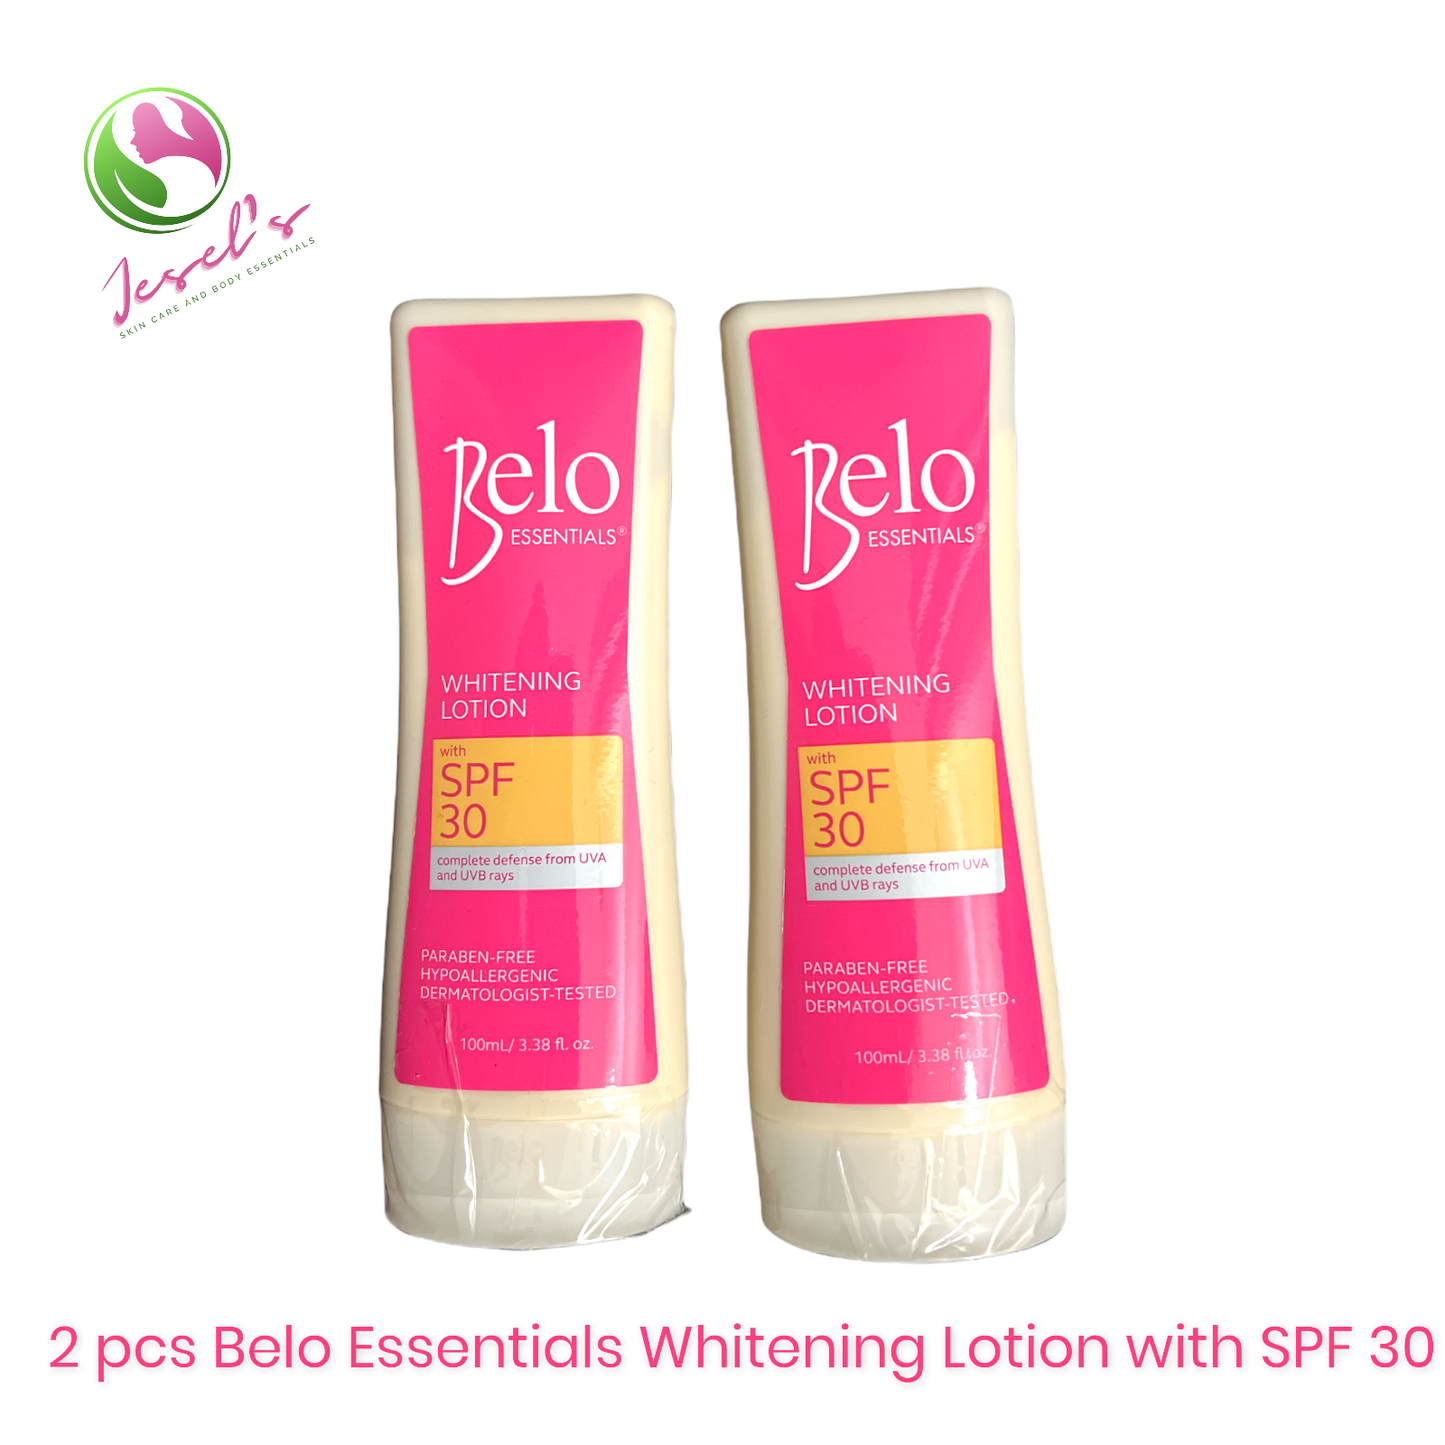 2 pcs. Belo Essentials Whitening Lotion with SPF 30 100 ml